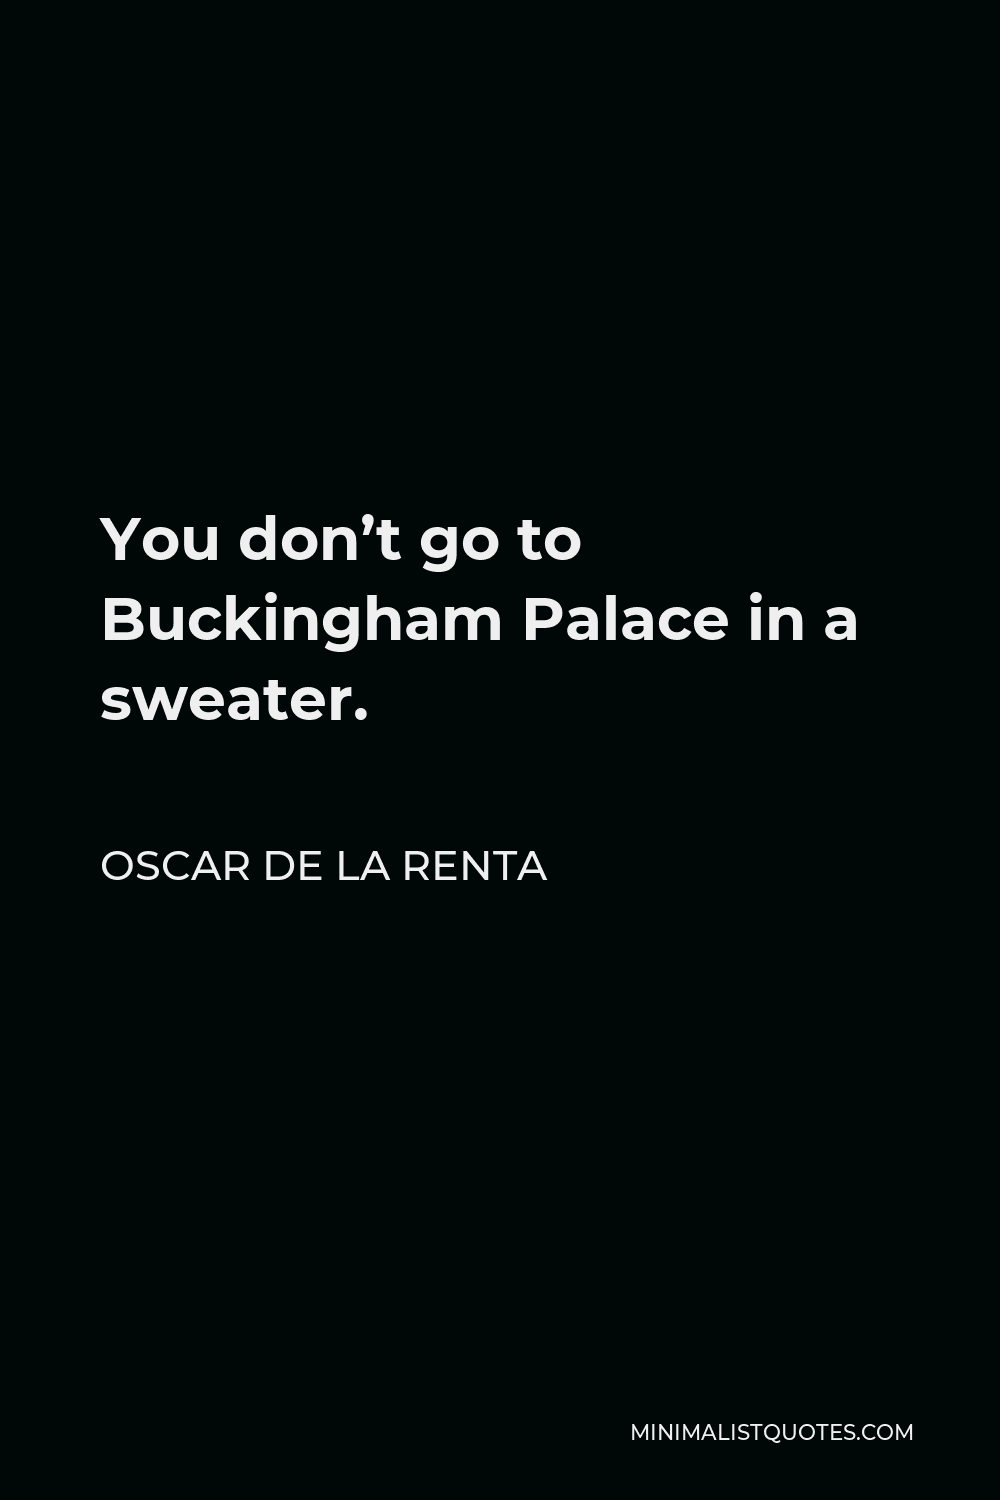 Oscar de la Renta Quote - You don’t go to Buckingham Palace in a sweater.